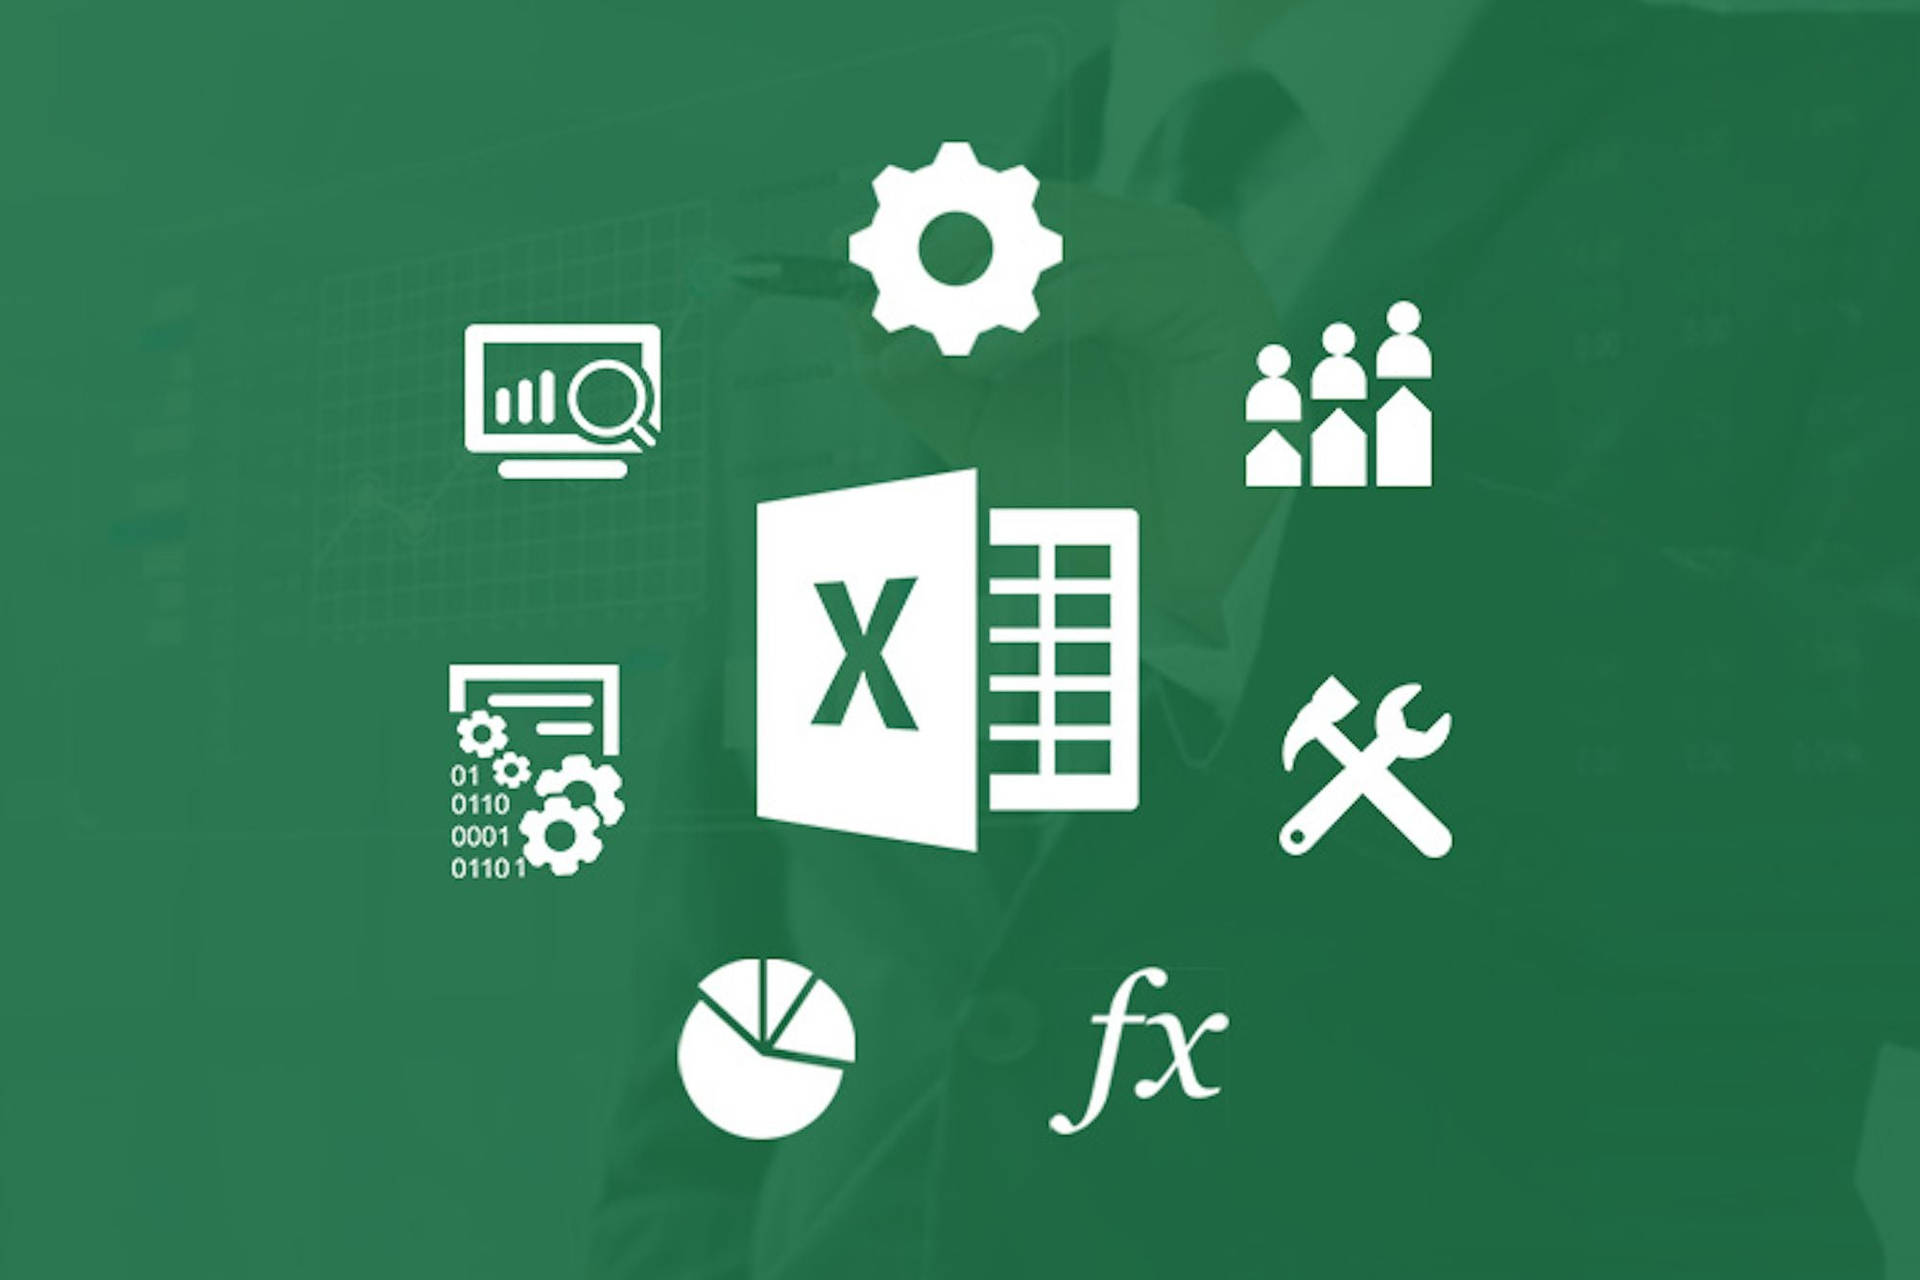 Excel Microsoft Application Icons Wallpaper